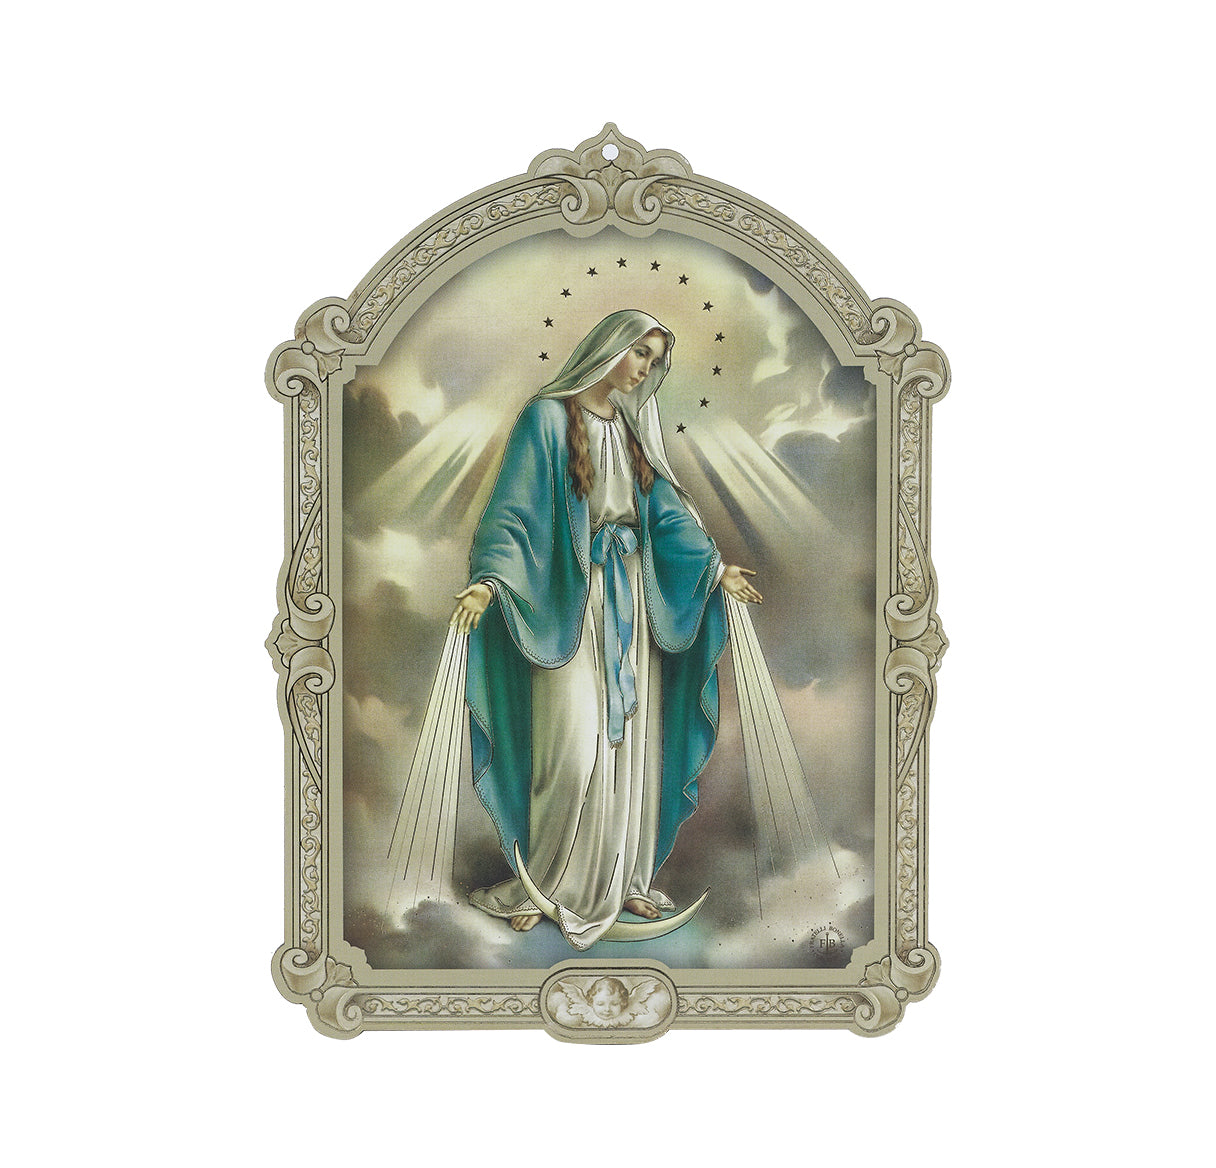 Our Lady of Grace Wood Plaque